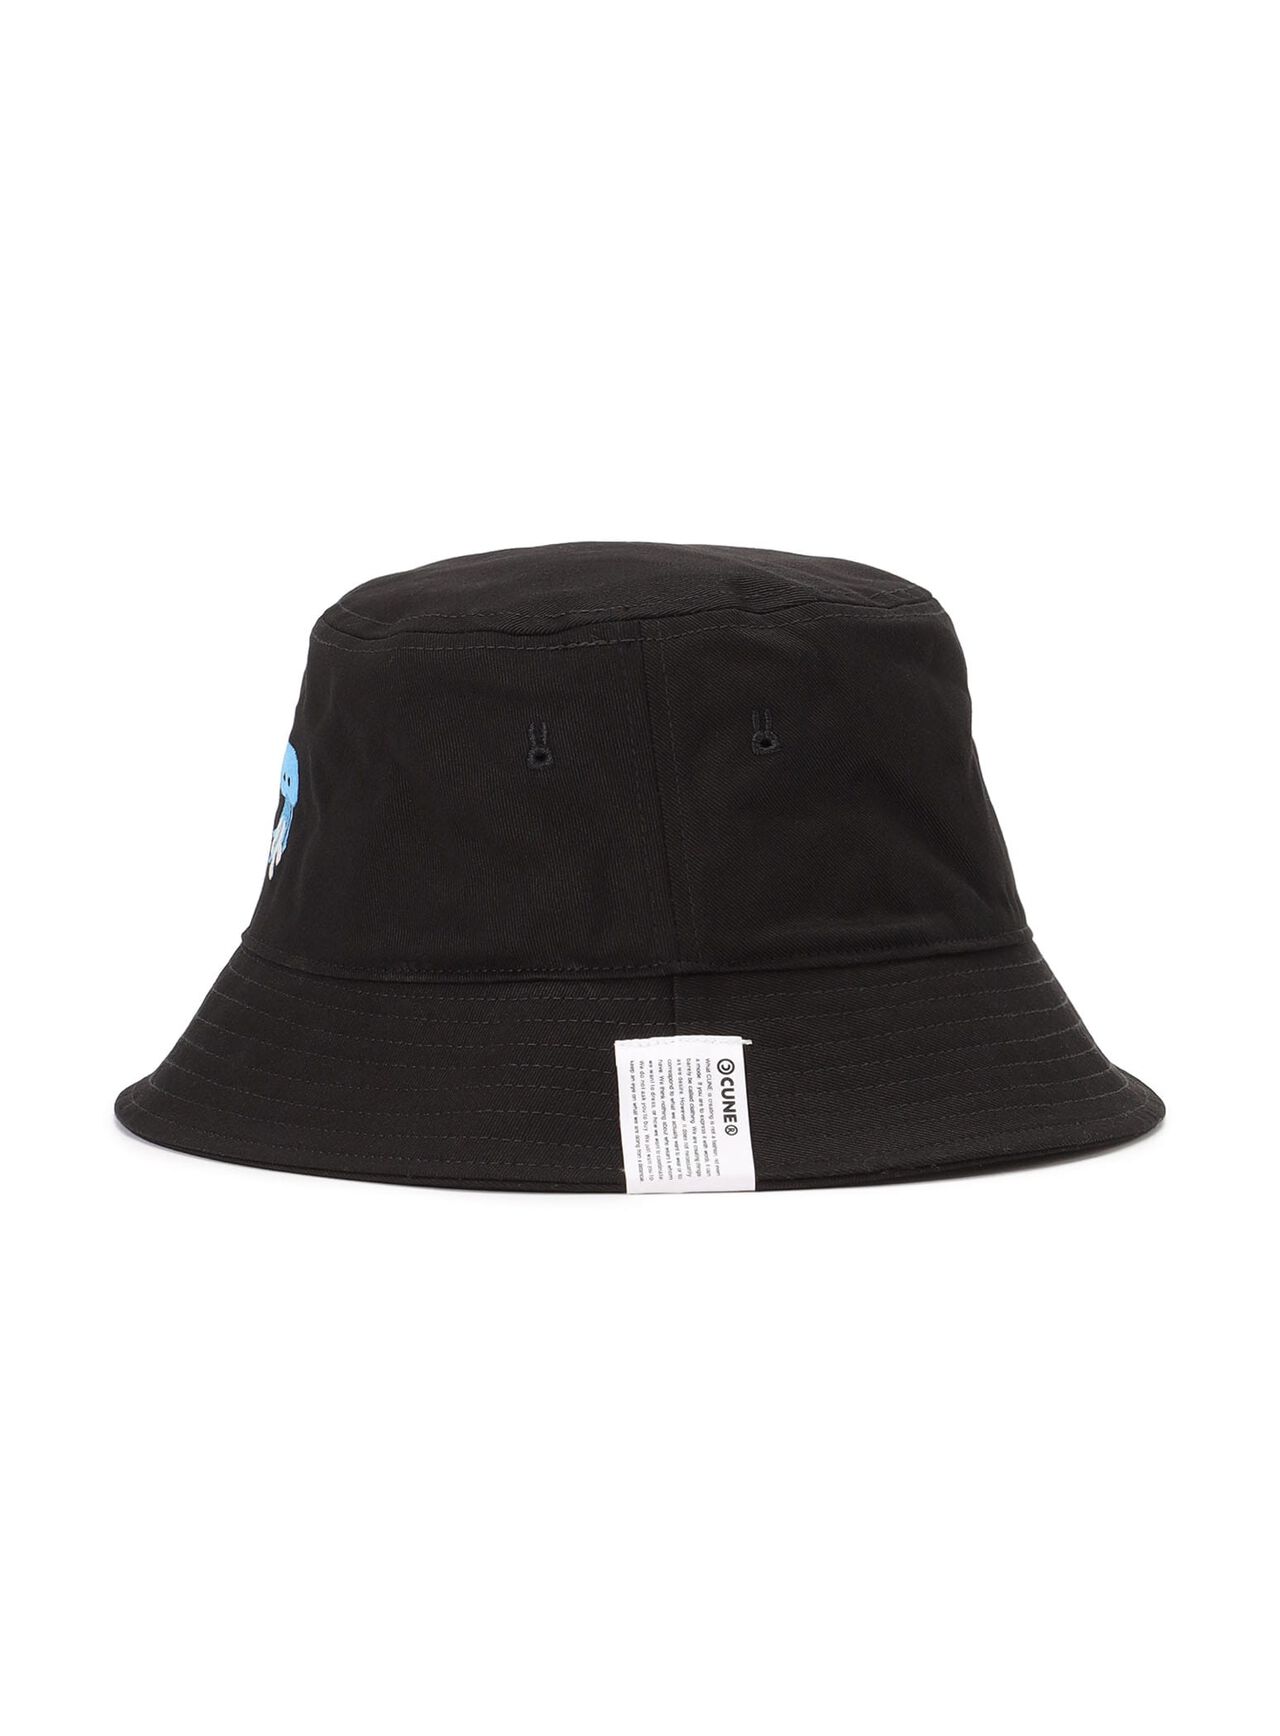 Embroidered Bucket Hat - Jellyfish,ONE, large image number 2